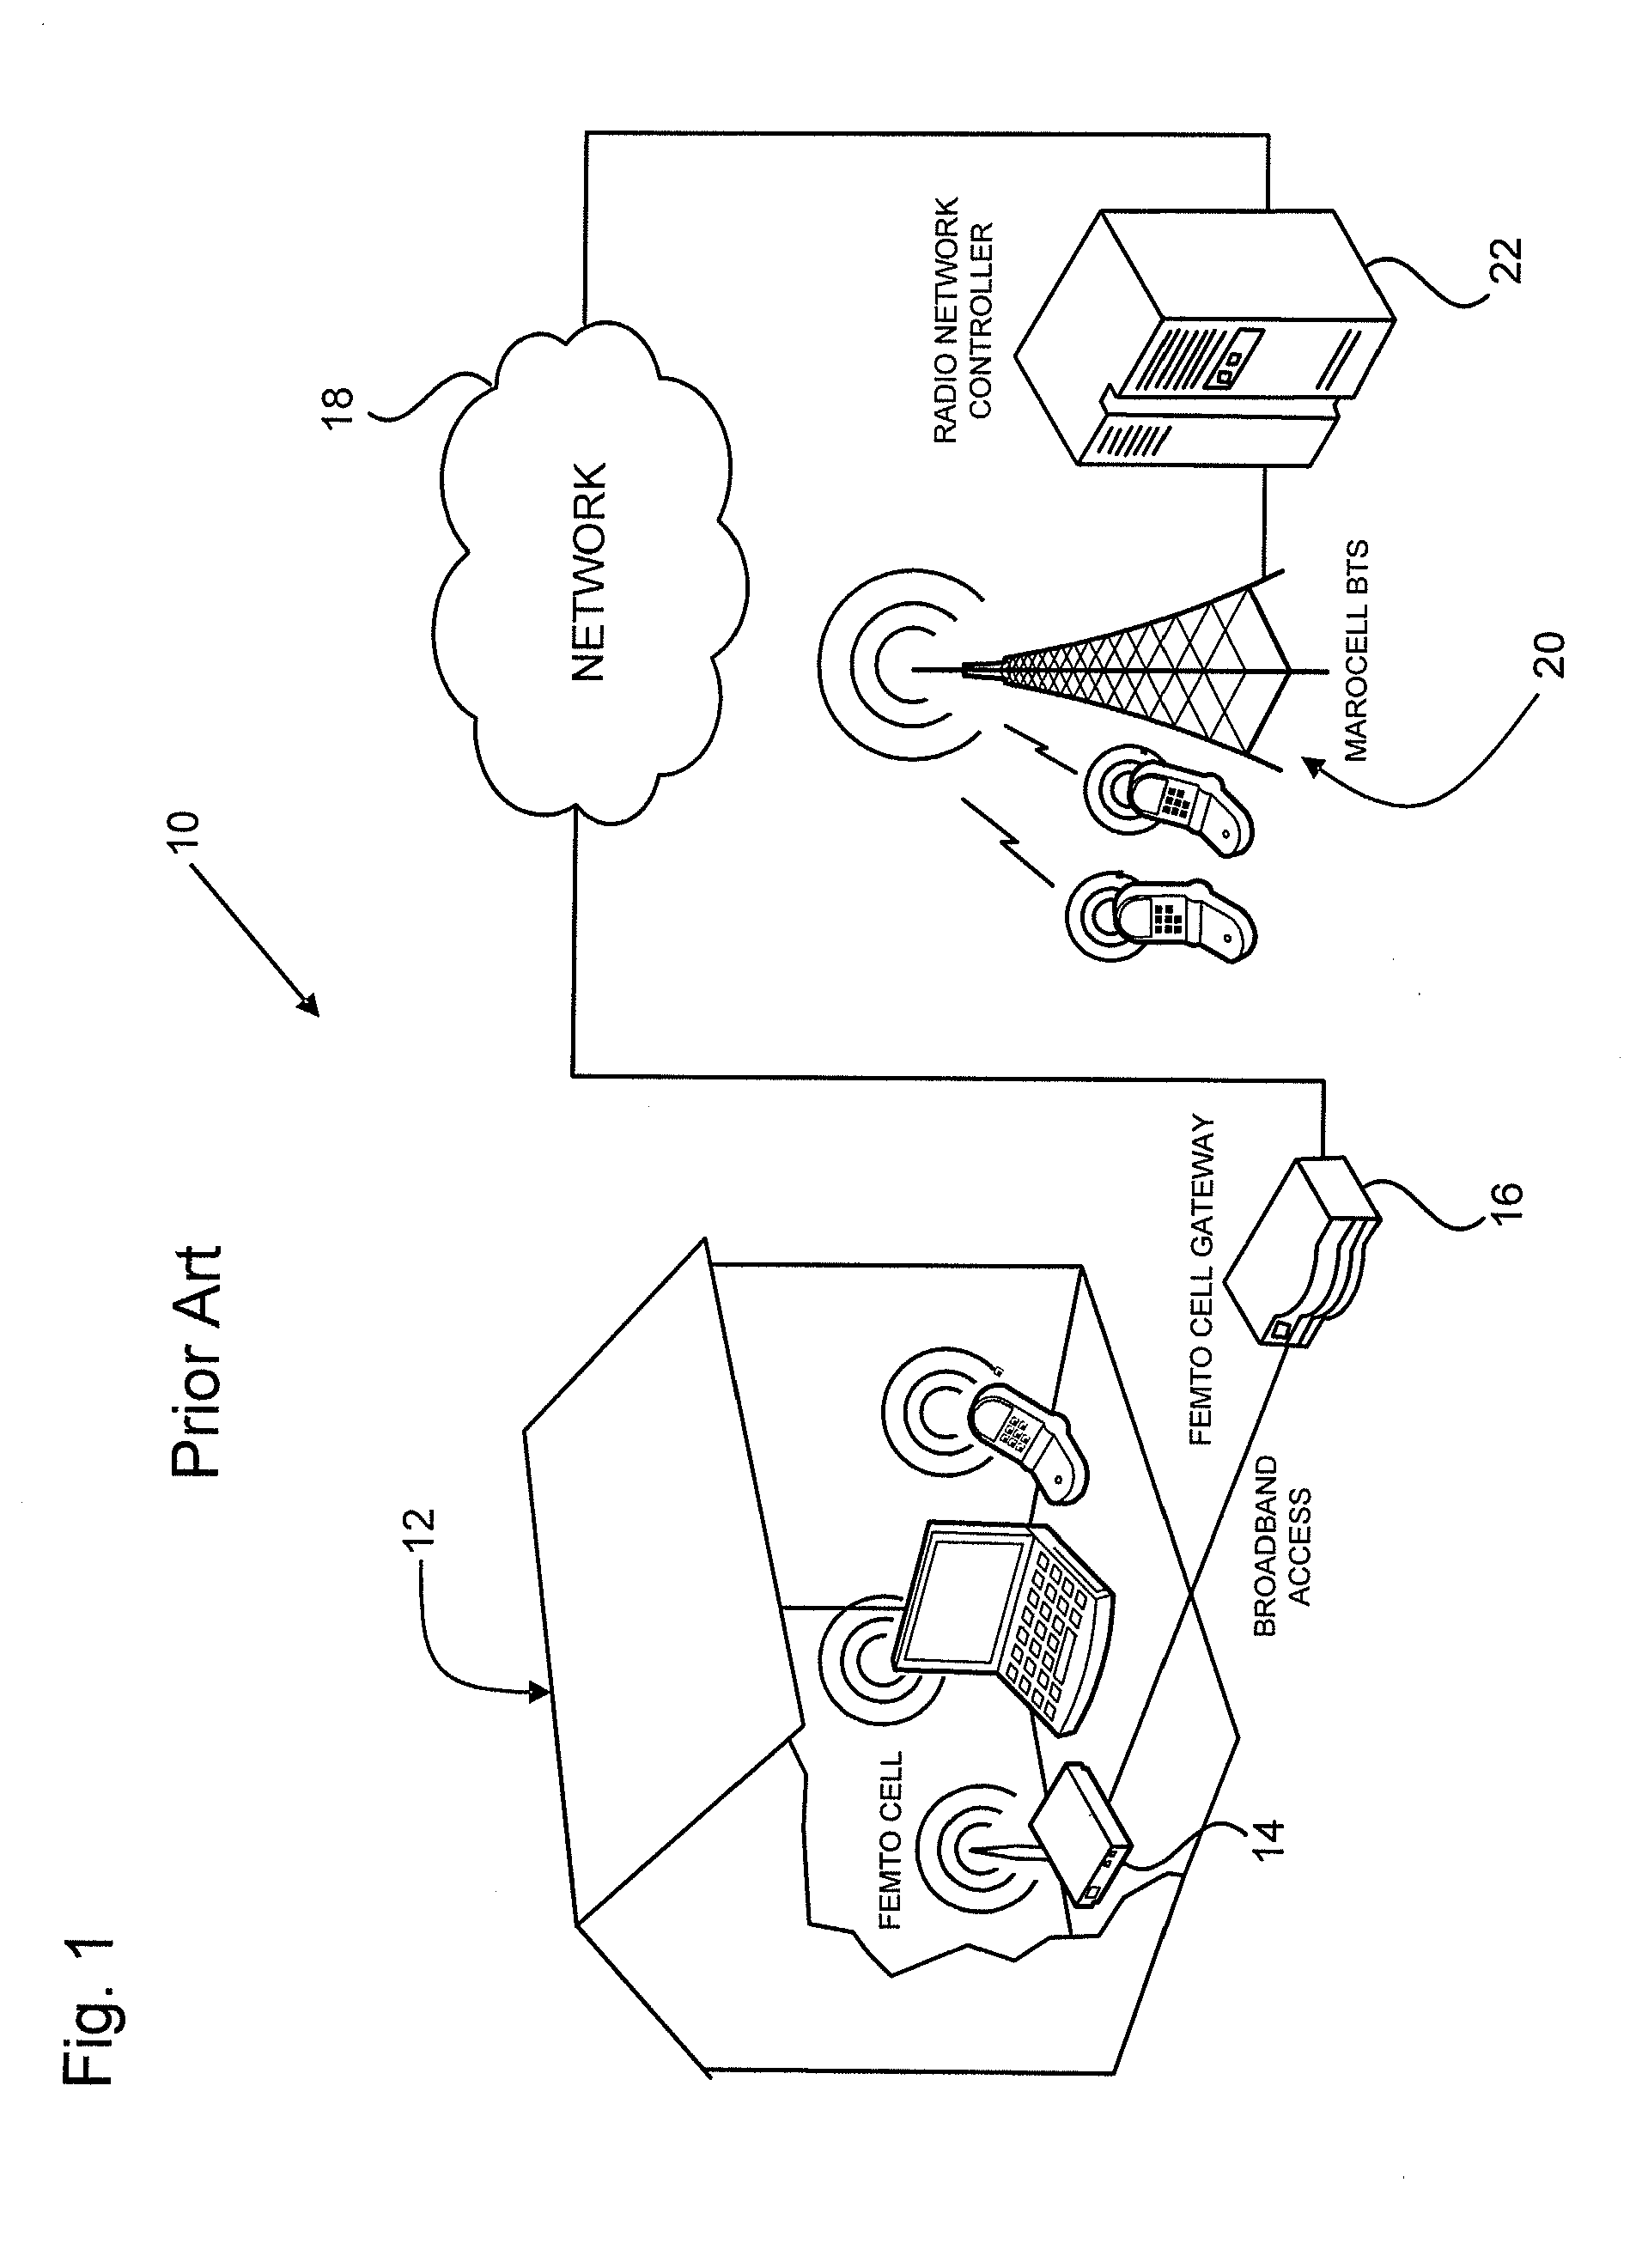 Method and system of implementing a radio network in unlicensed spectrum